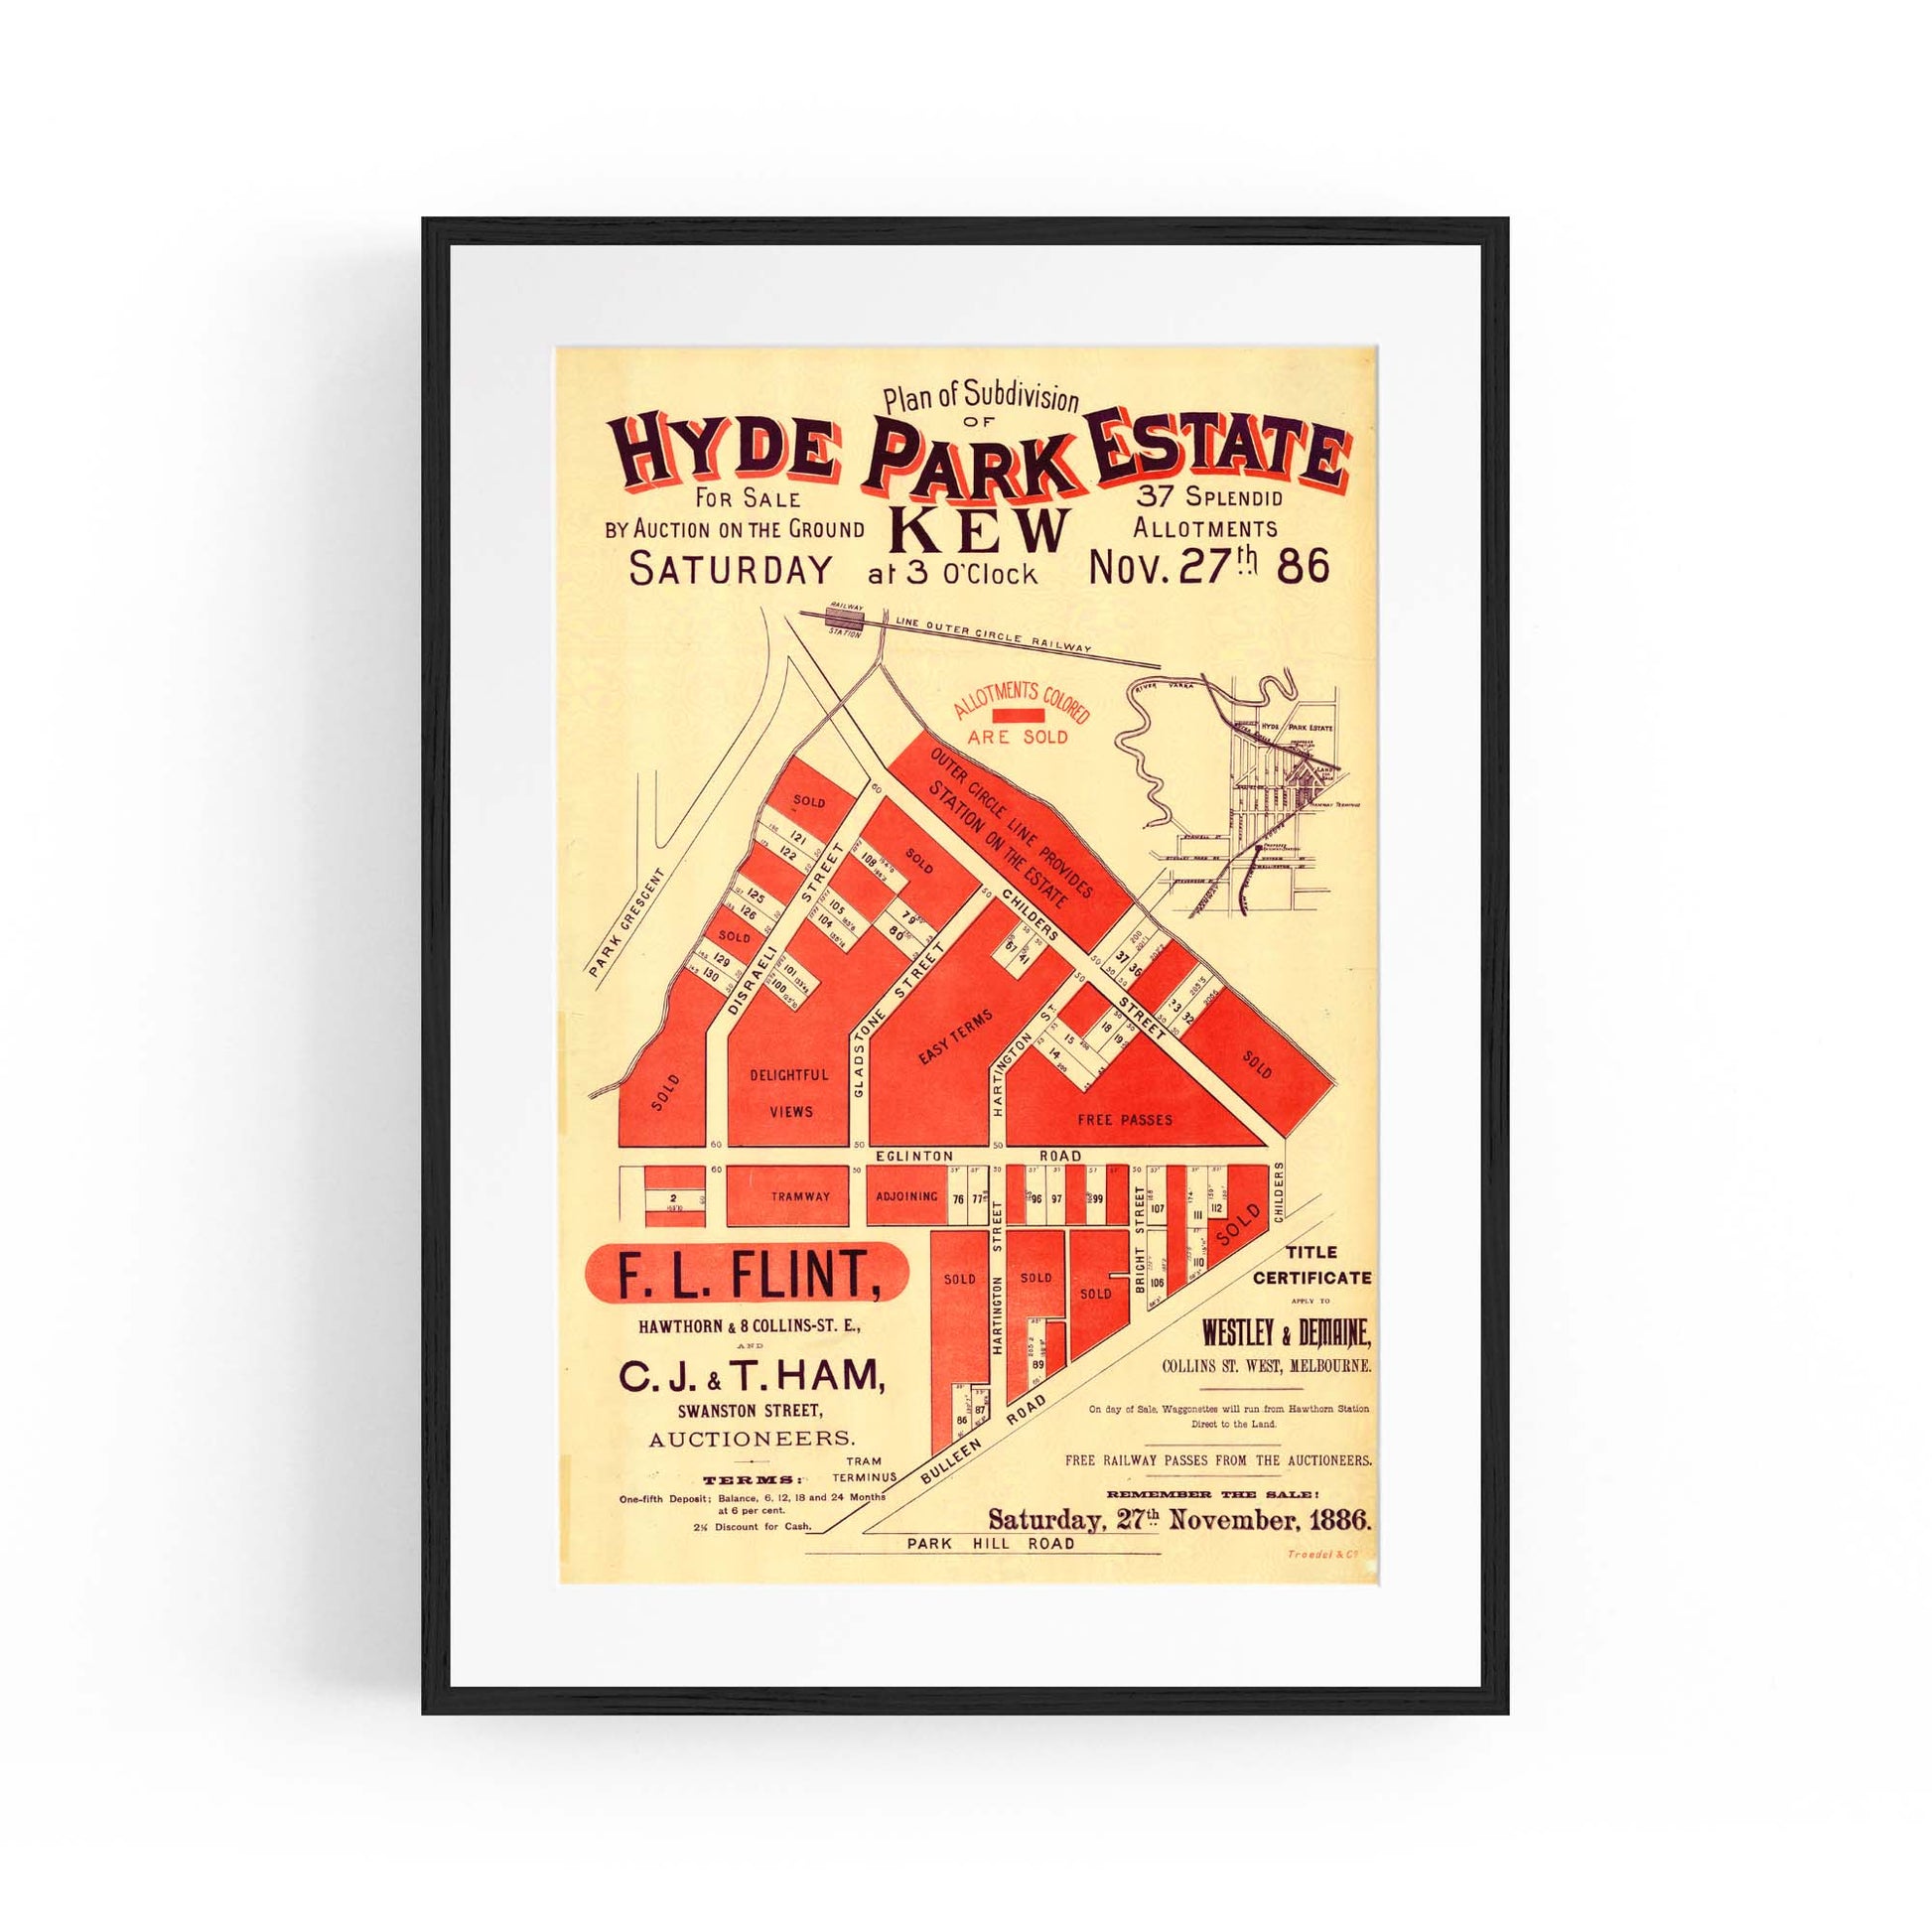 Kew Melbourne Vintage Real Estate Advert Wall Art #2 - The Affordable Art Company